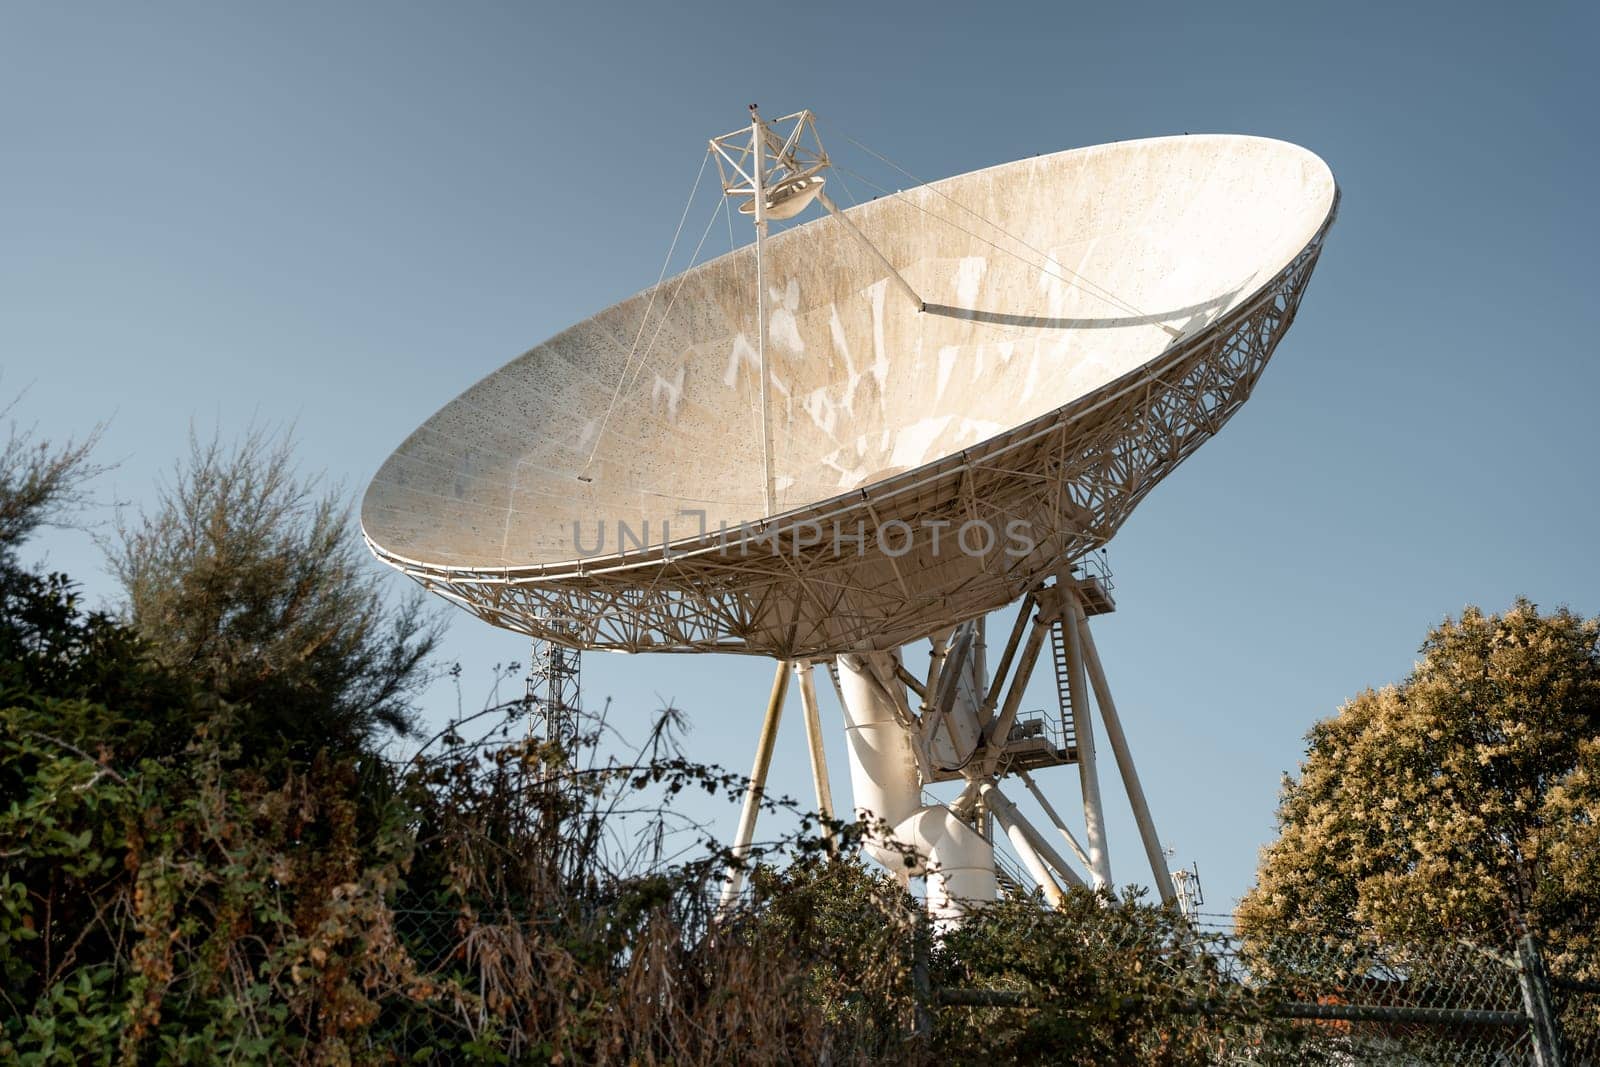 Earth based astronomical radio telescope. Radio telescopes used in science for space observation and distant objects exploring.